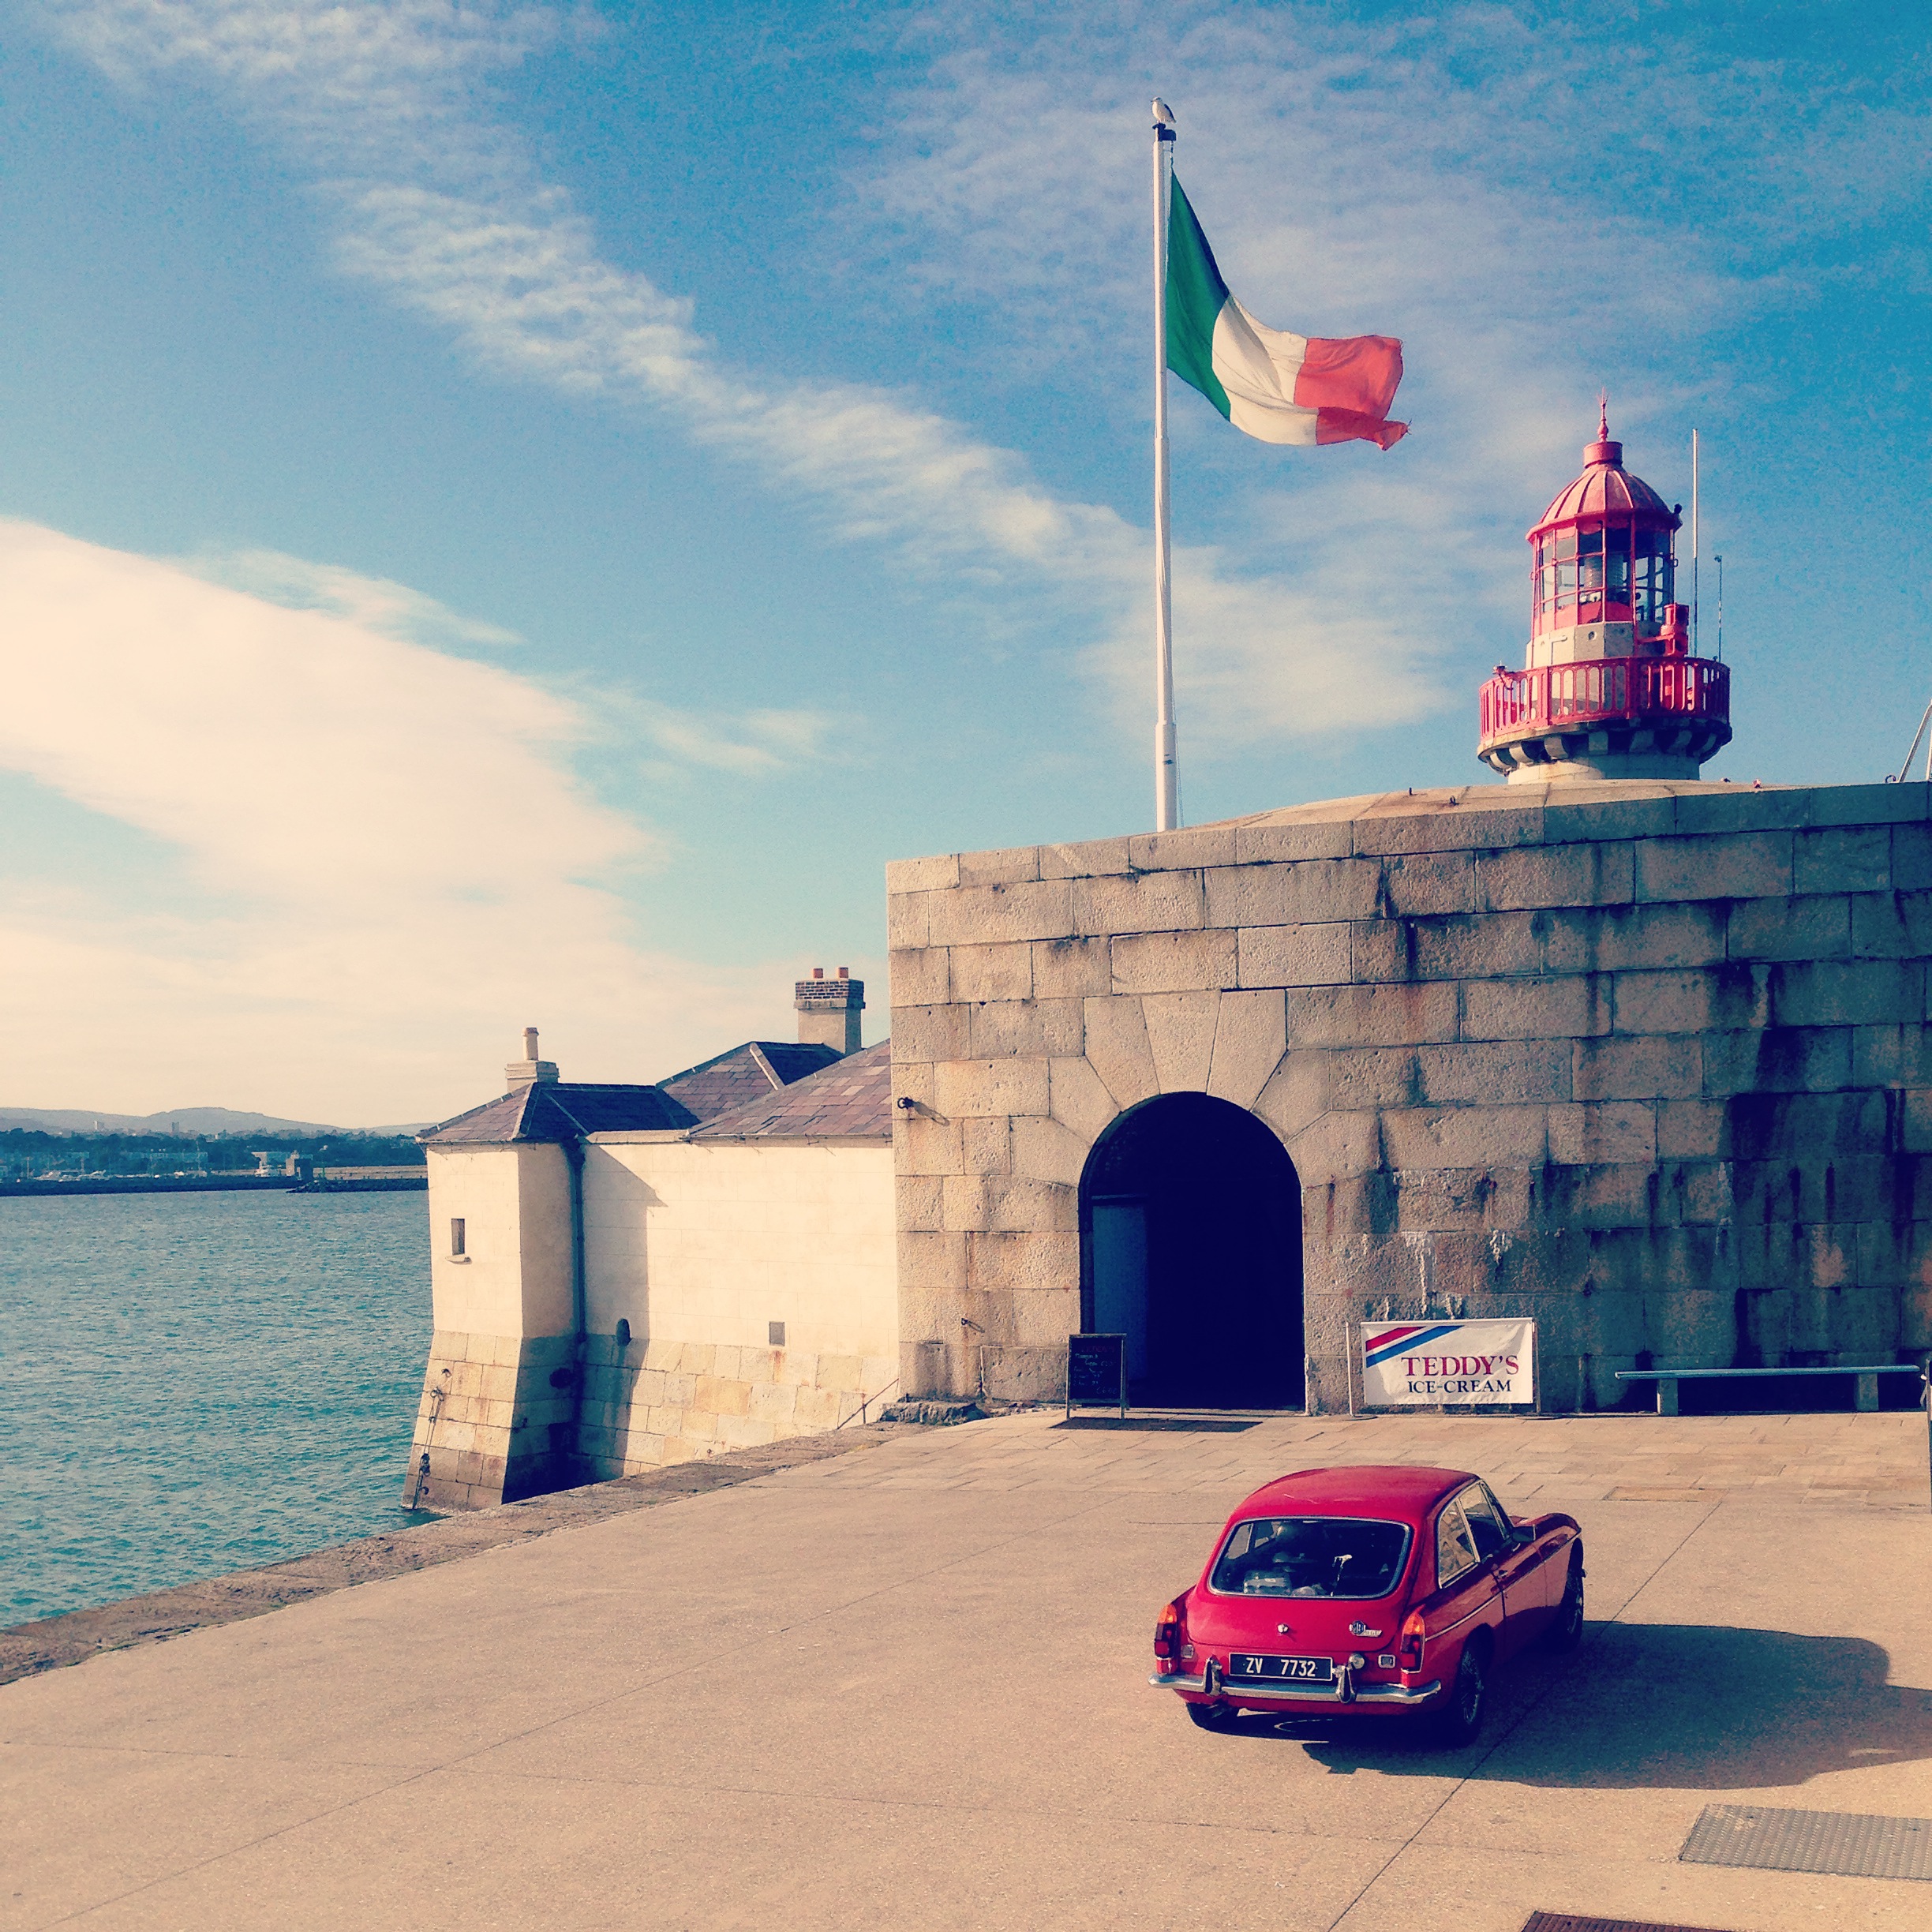 The Lighthouse: Dun Laoghaire